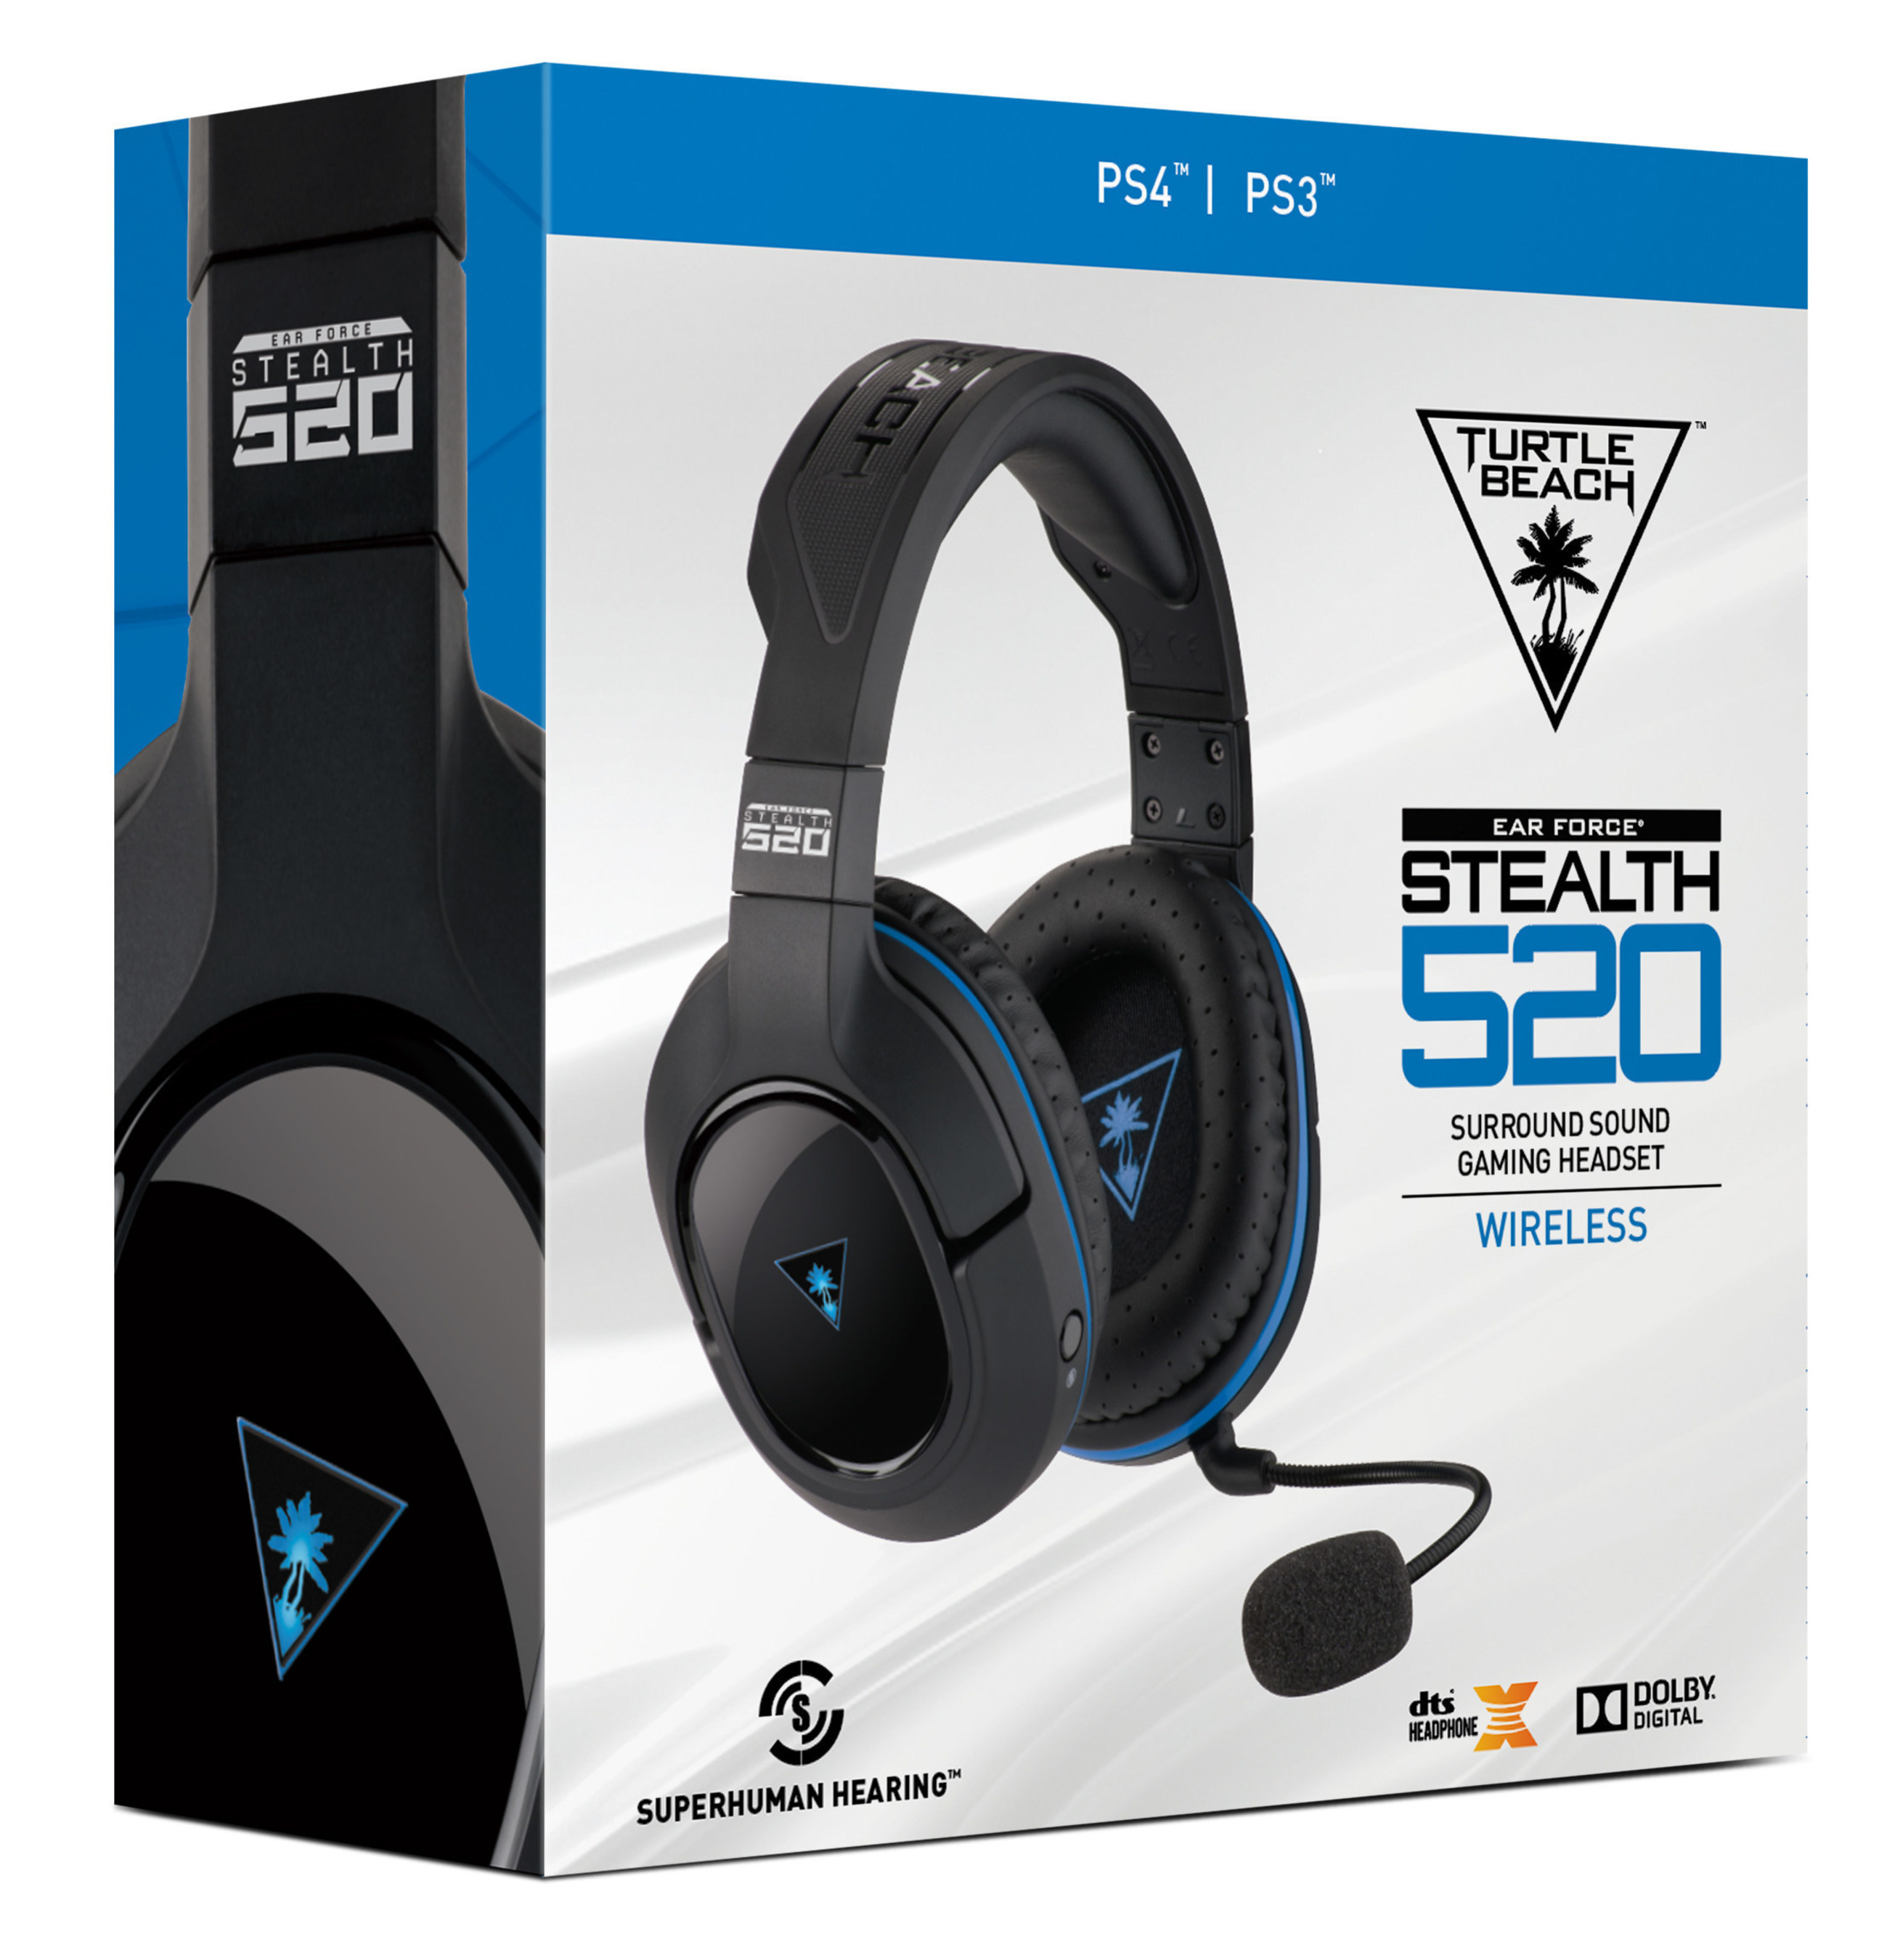 The Turtle Beach STEALTH 520 gaming headset offers 100% wireless connectivity to the PlayStation 4 and PlayStation 3, as well as DTS Headphone:X 7.1 Surround Sound, Superhuman Hearing, and a variety of additional features no gamer should be without.